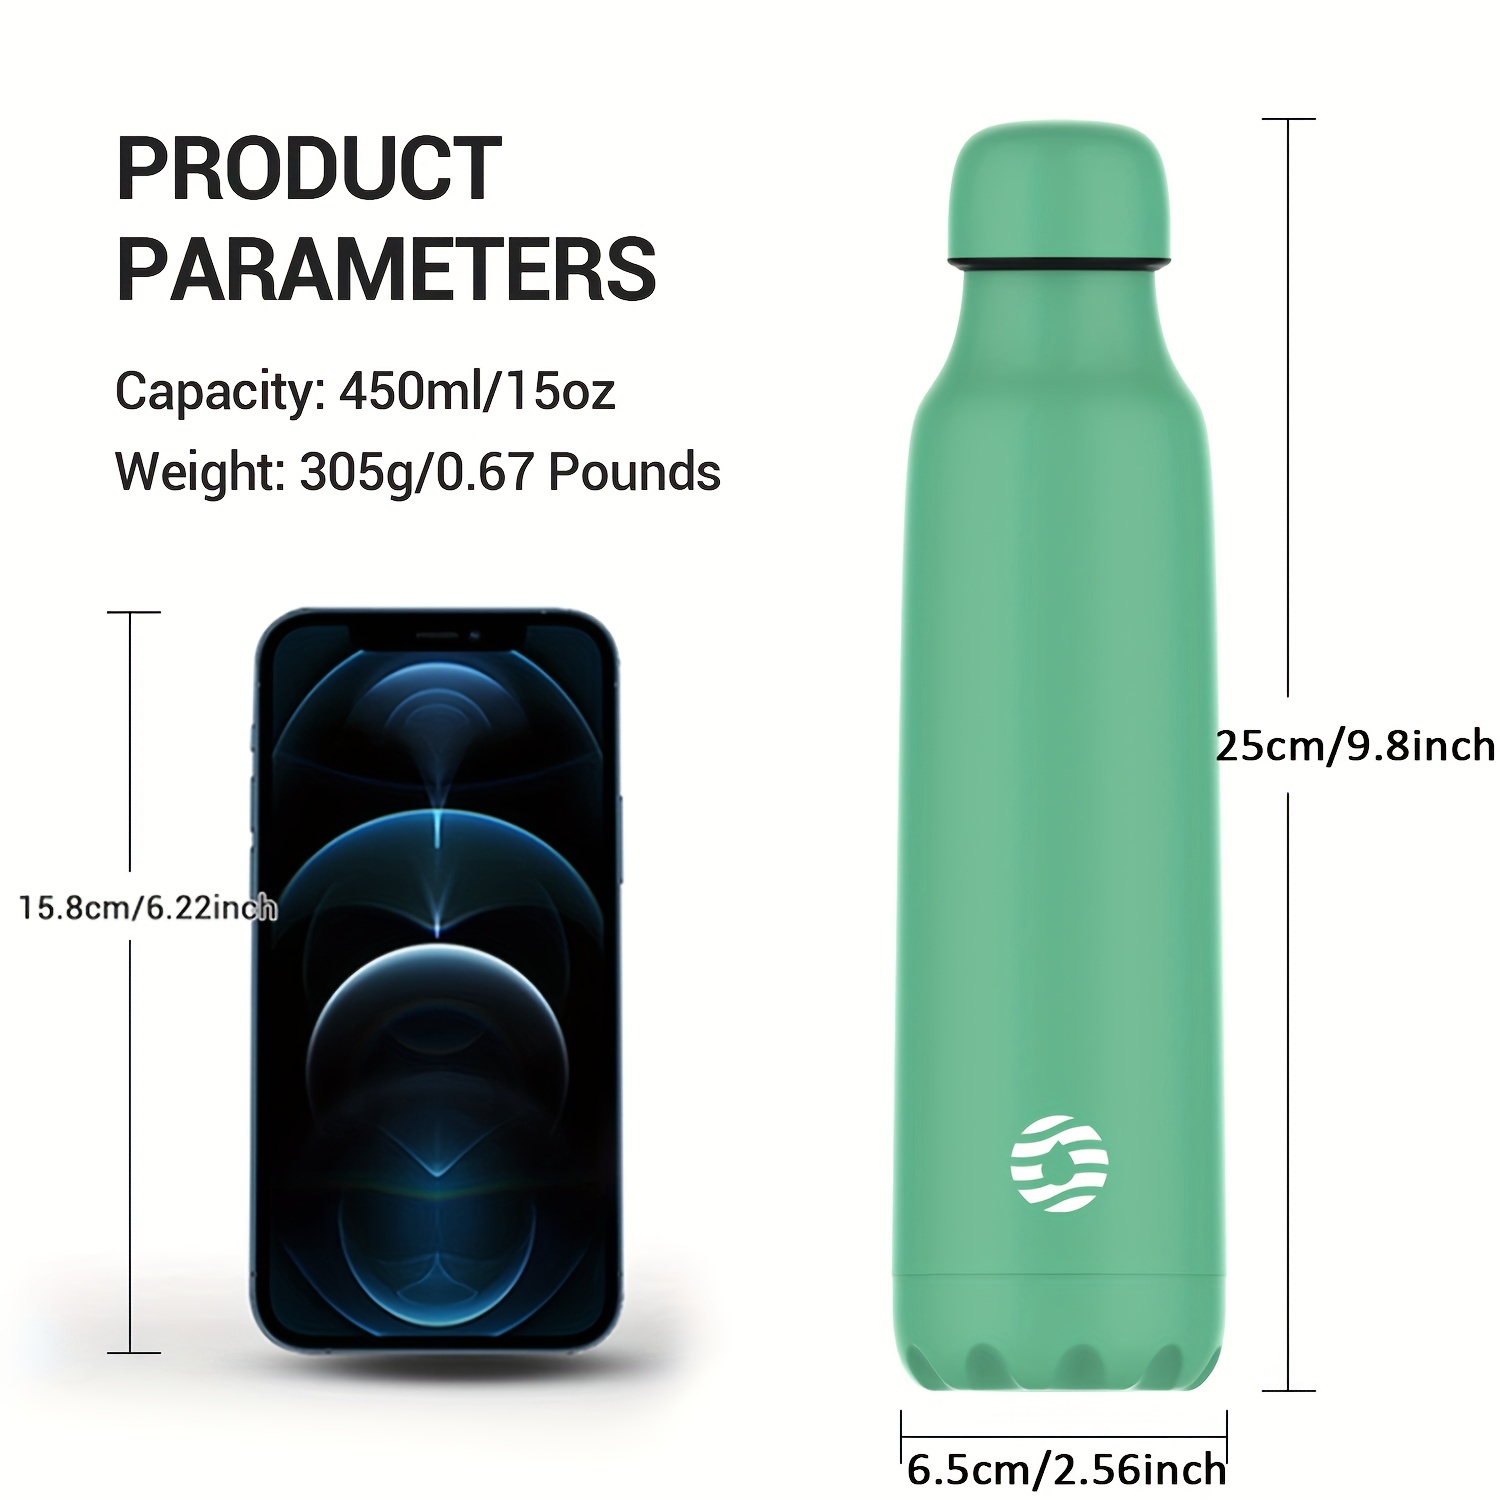 Just Do Thermal Bottles for Hot and Cold,15oz Water Bottle with Cup, Stainless Steel Vacuum Insulated Water Bottle Eco Friendly (White)